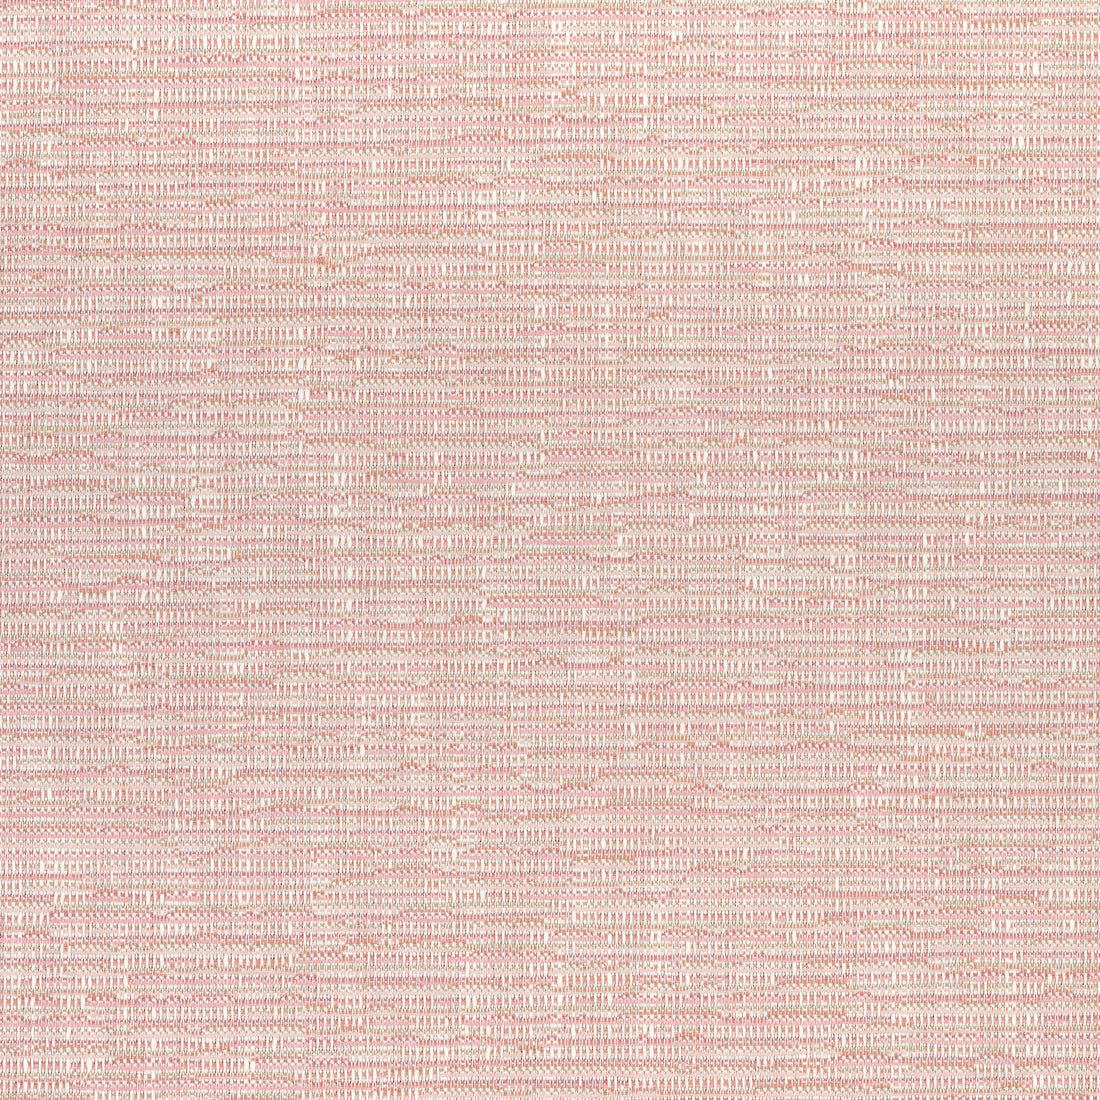 Cadence fabric in blush color - pattern number W74036 - by Thibaut in the Cadence collection